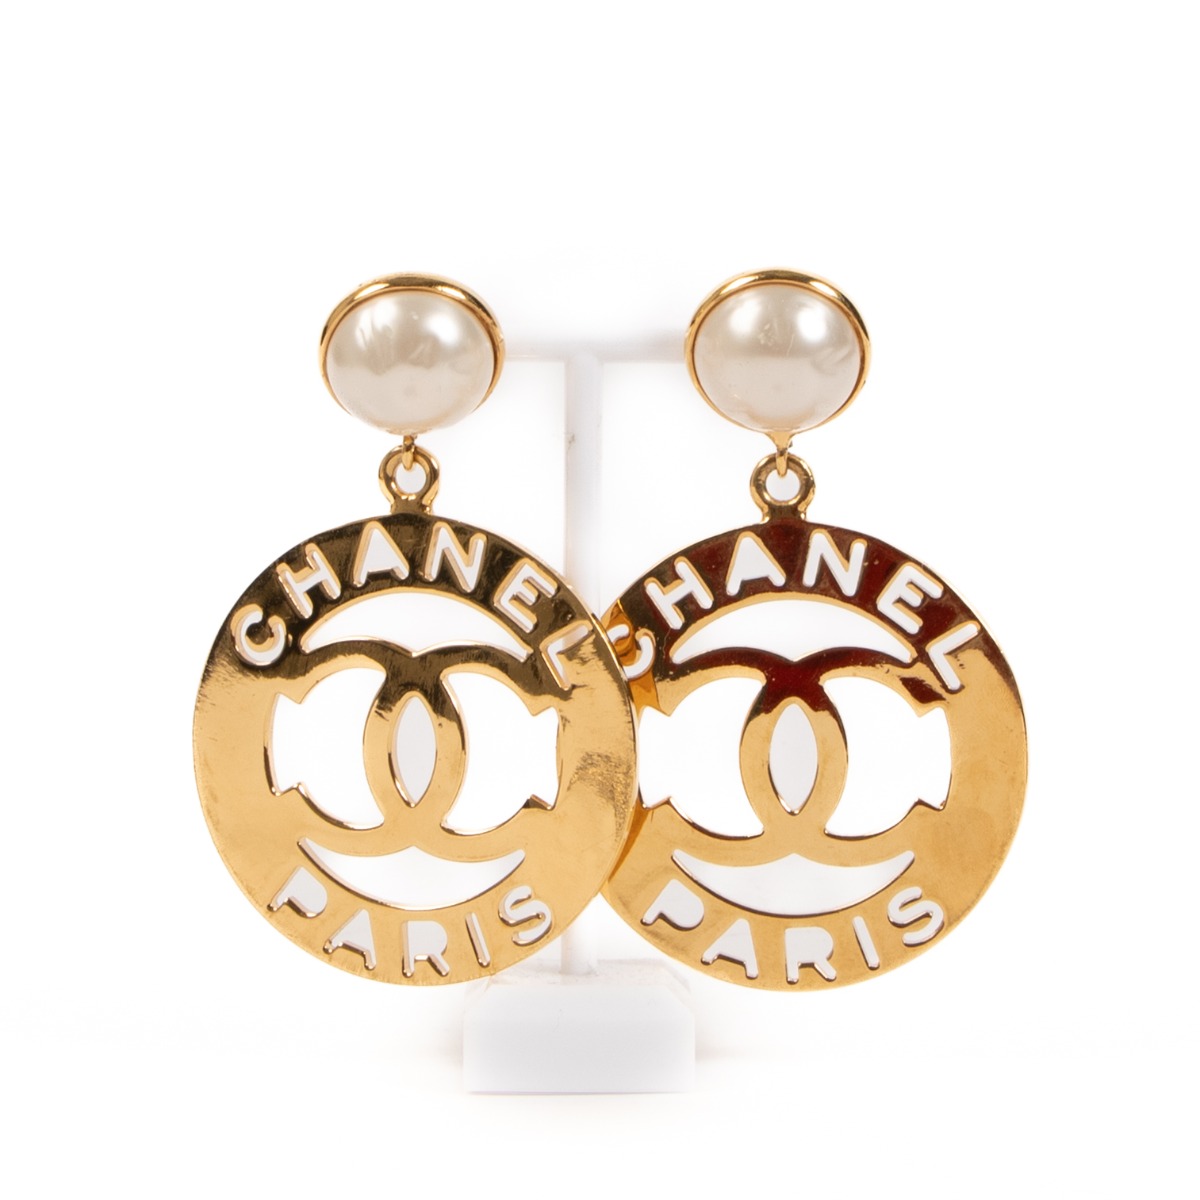 Authentic Chanel Earrings 